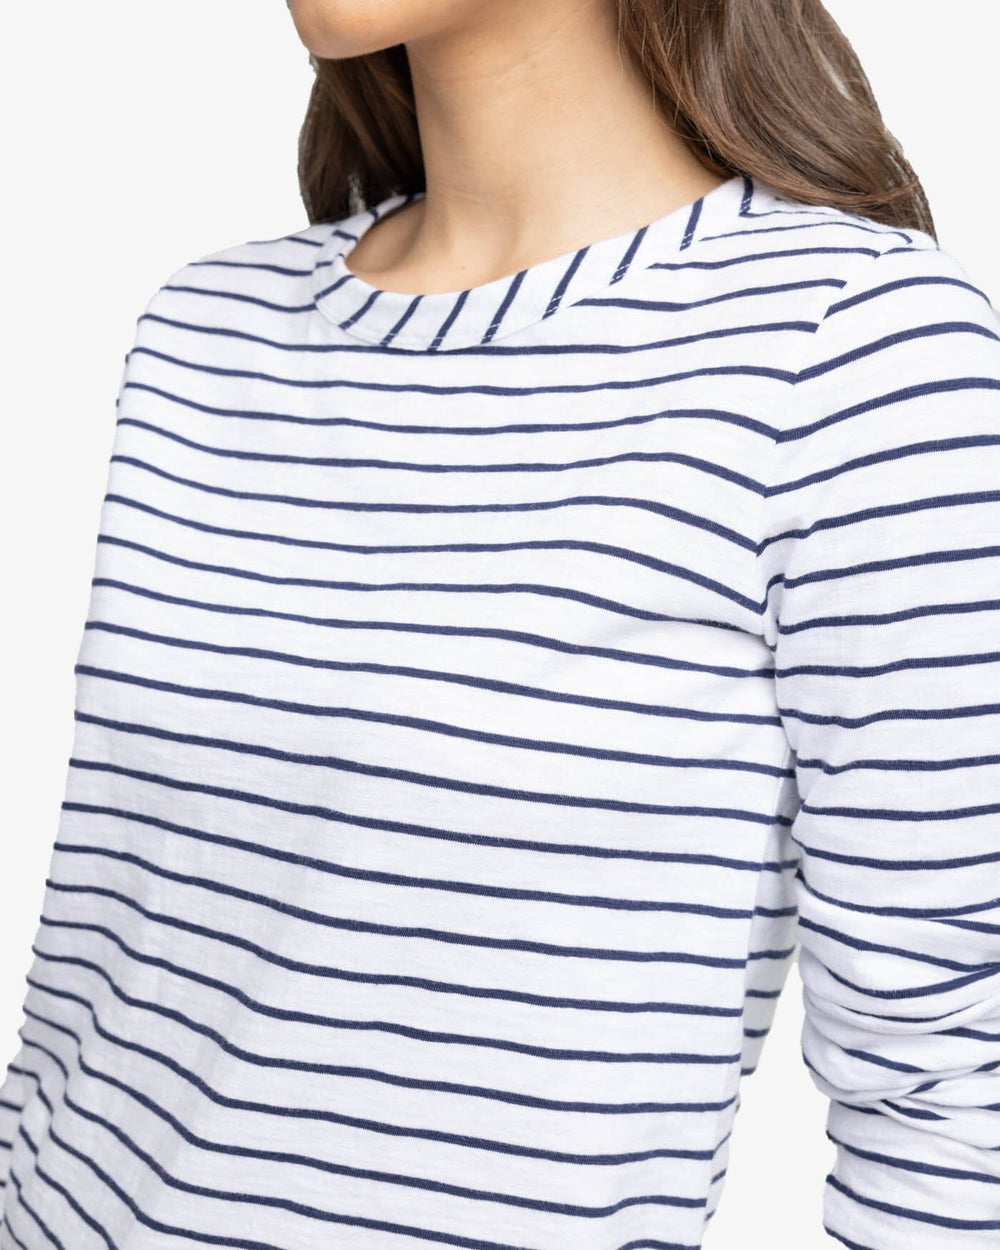 The detail view of the Southern Tide Kimmy Stripe Crew Neck Long Sleeve T-Shirt by Southern Tide - Nautical Navy